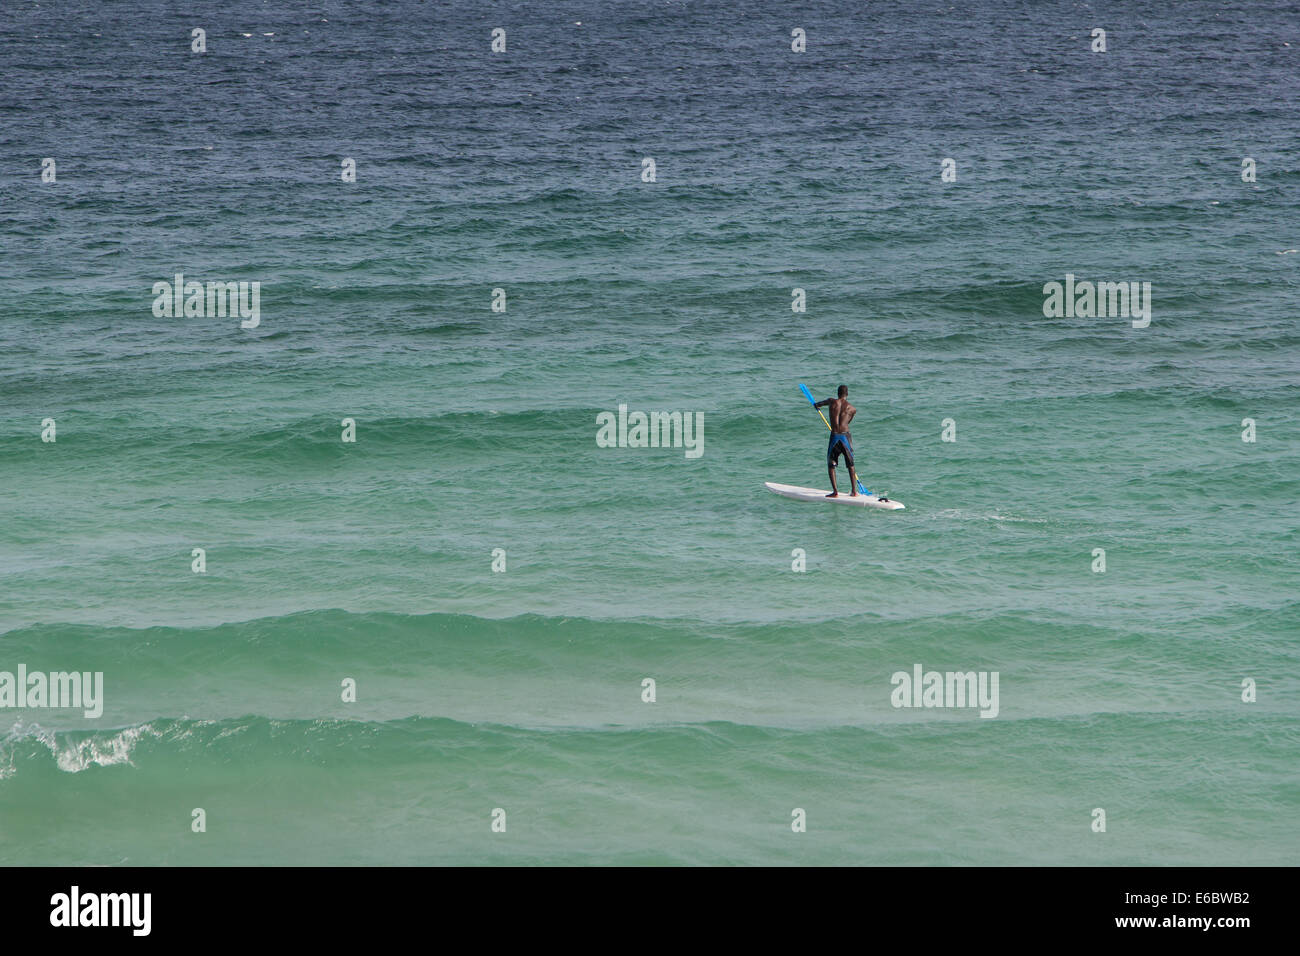 Barbados man paddle boarding on turquoise blue sea in the Caribbean. Stock Photo